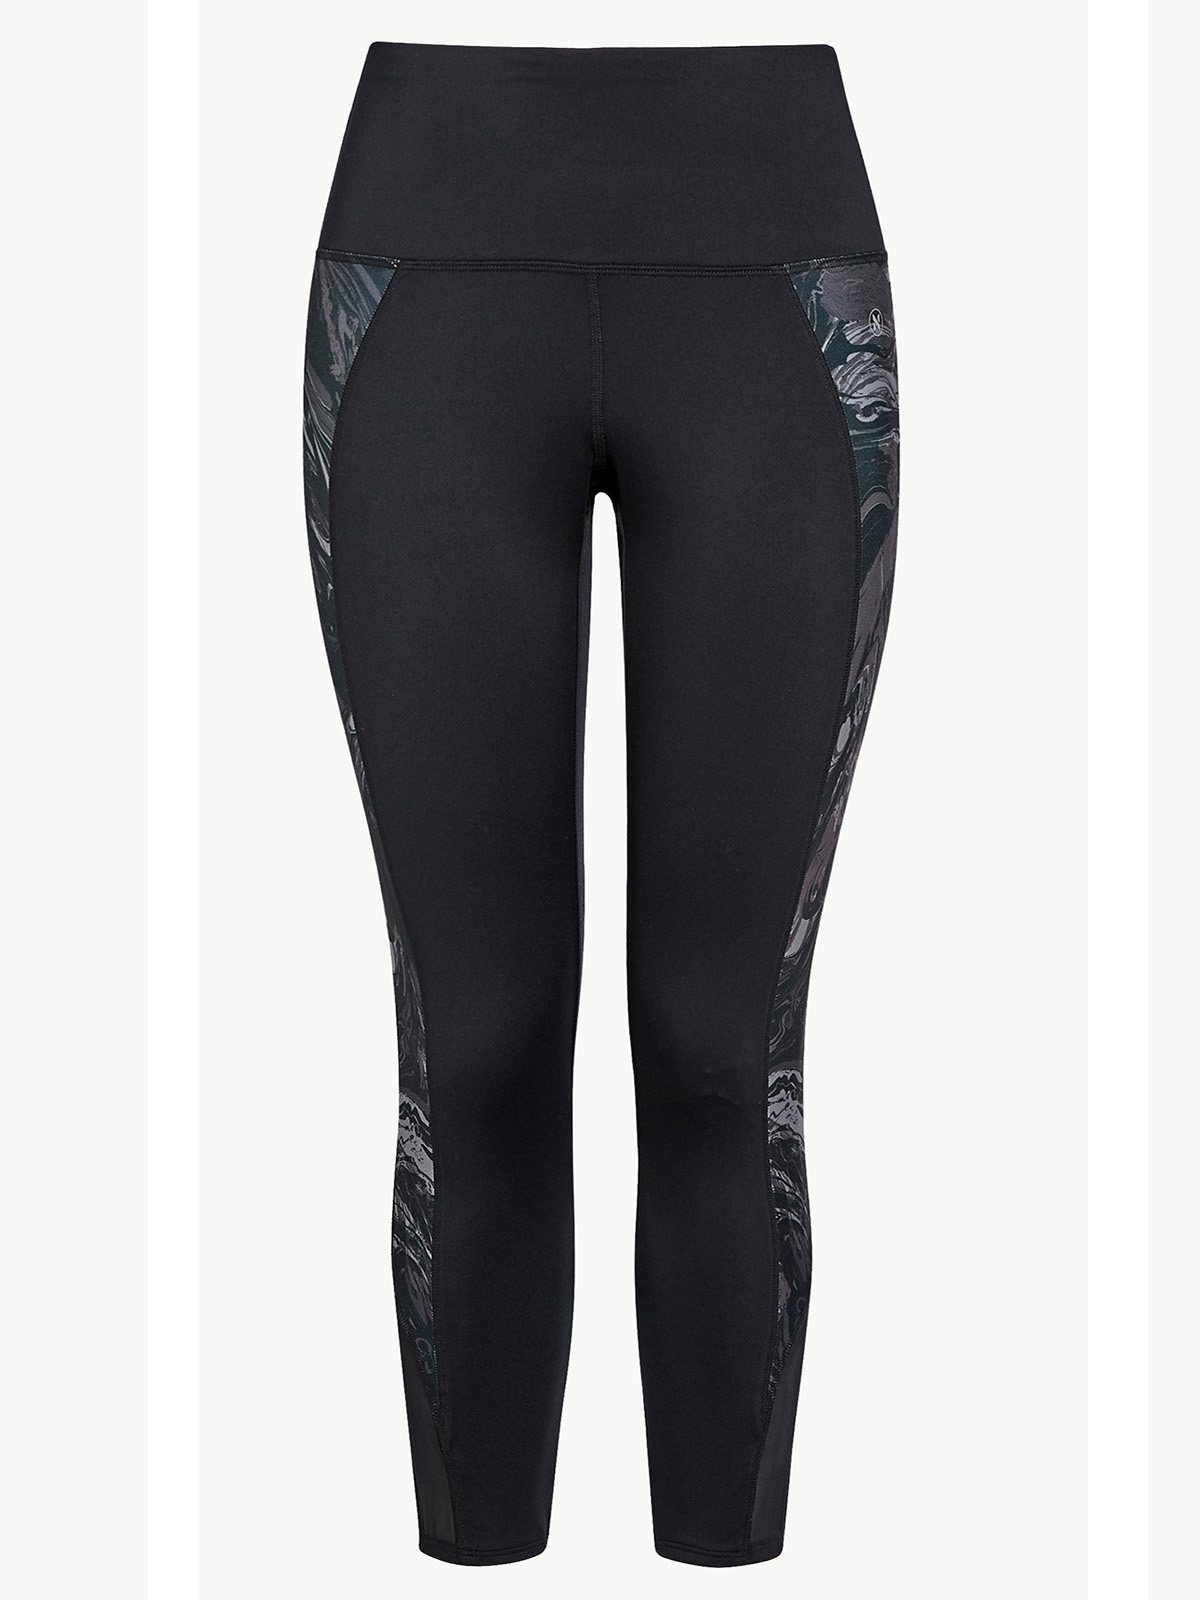 BLACK Panelled Cropped Sports Leggings - Size 8 to 10